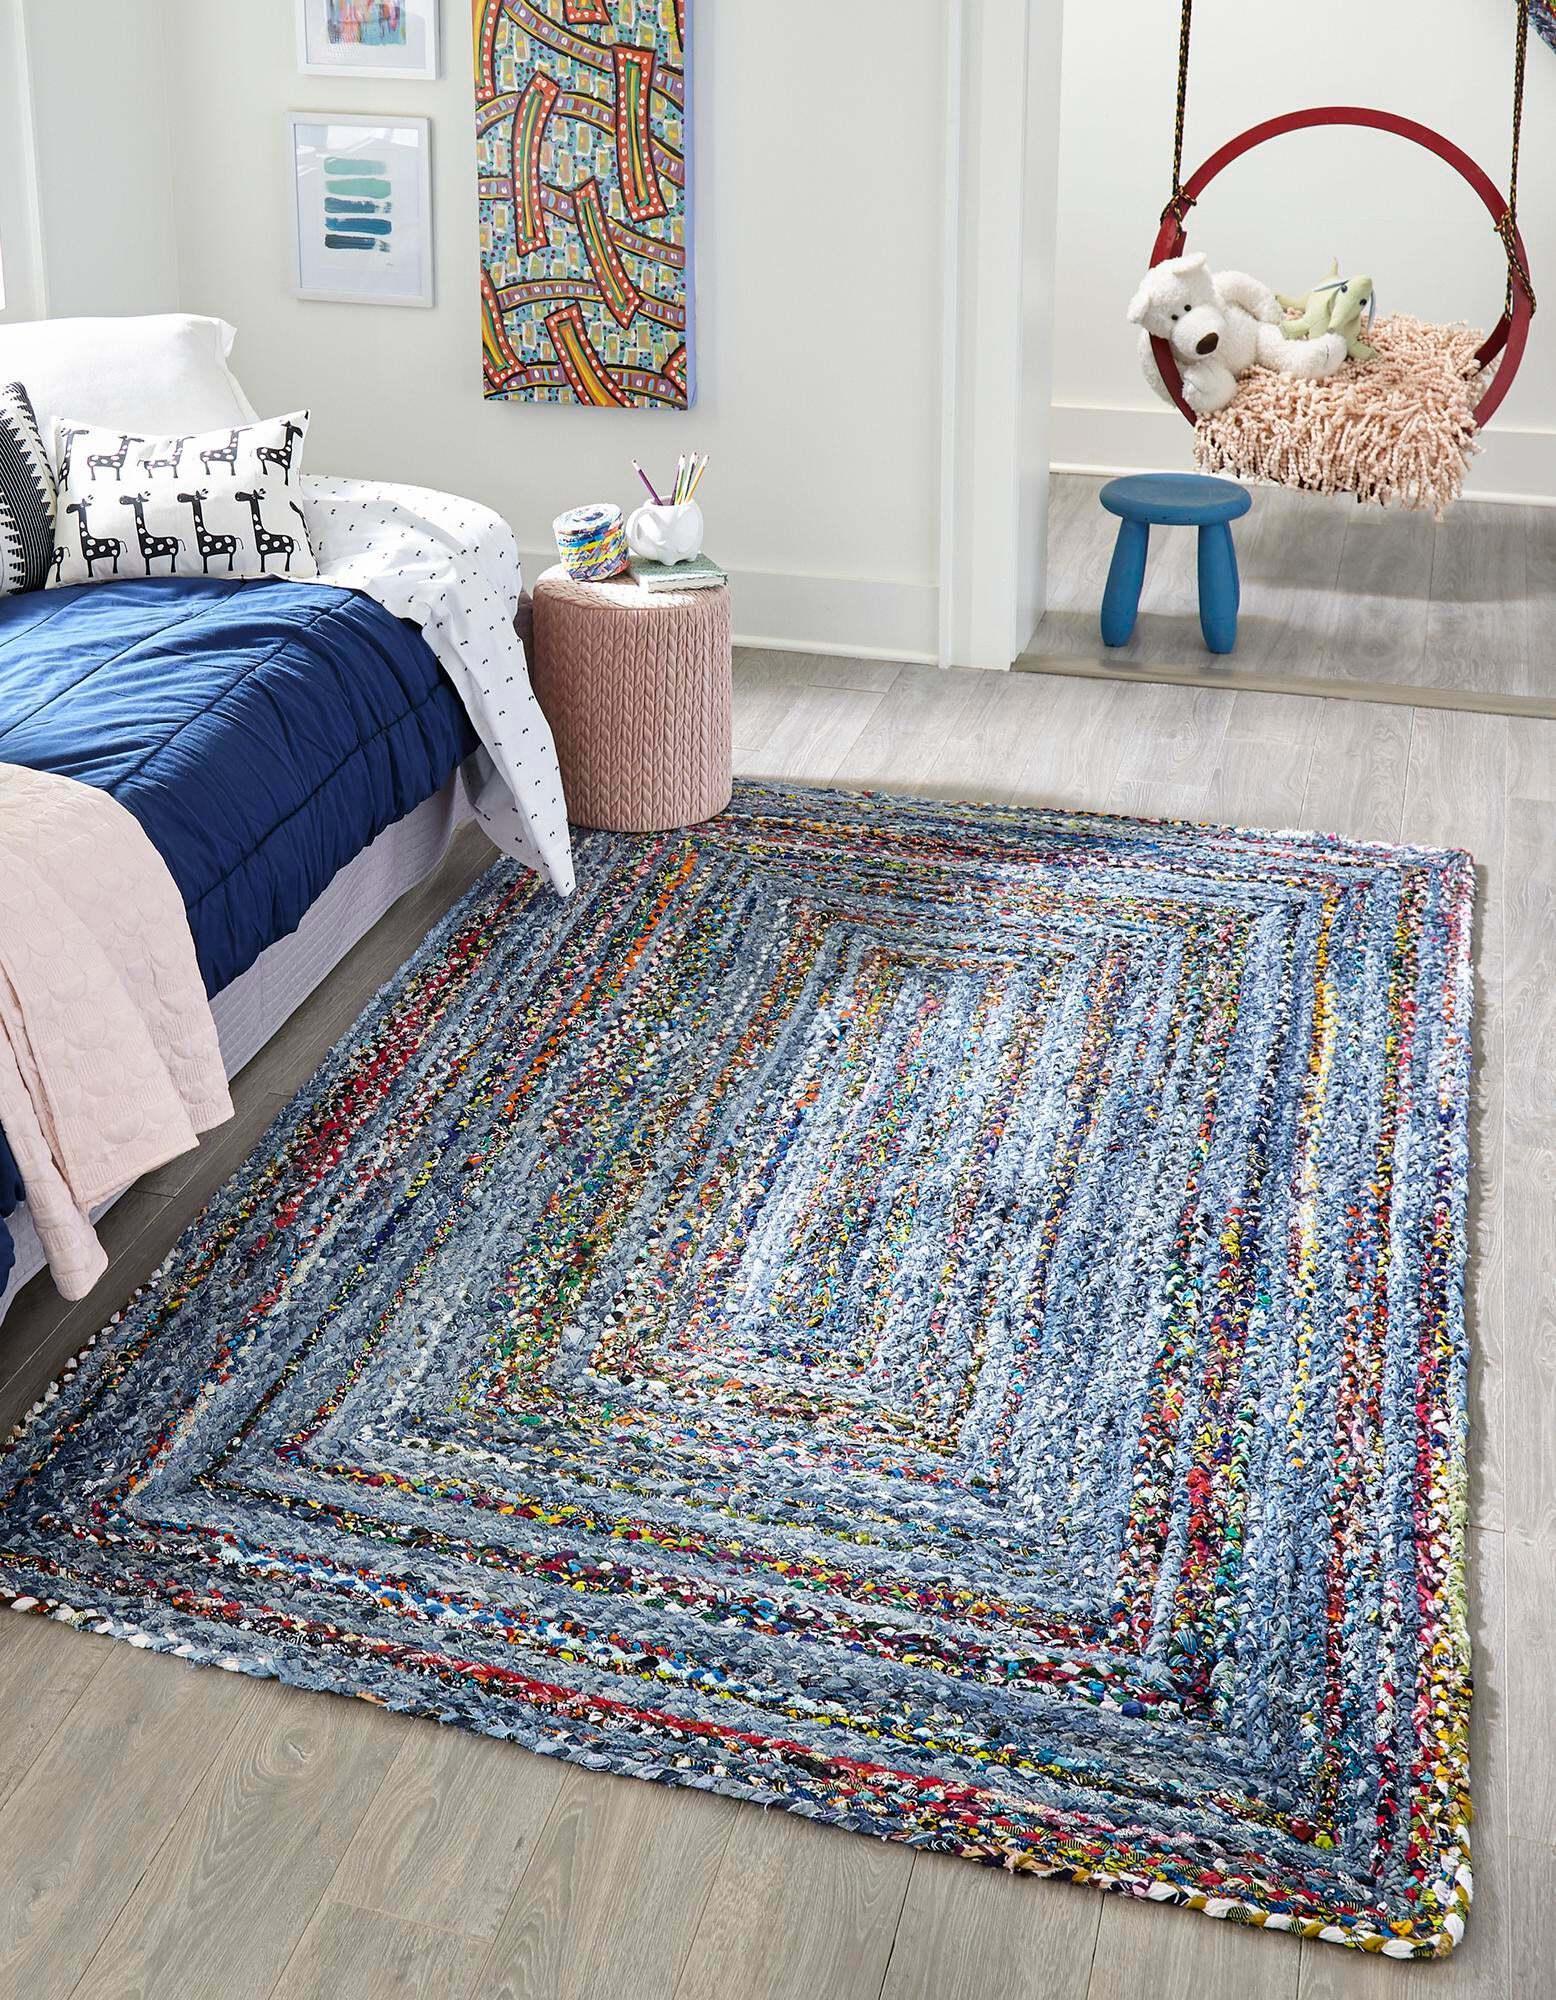 Unique Loom Indoor Rugs - Braided Chindi Abstract Rectangular 9x12 Rug Blue & Multi